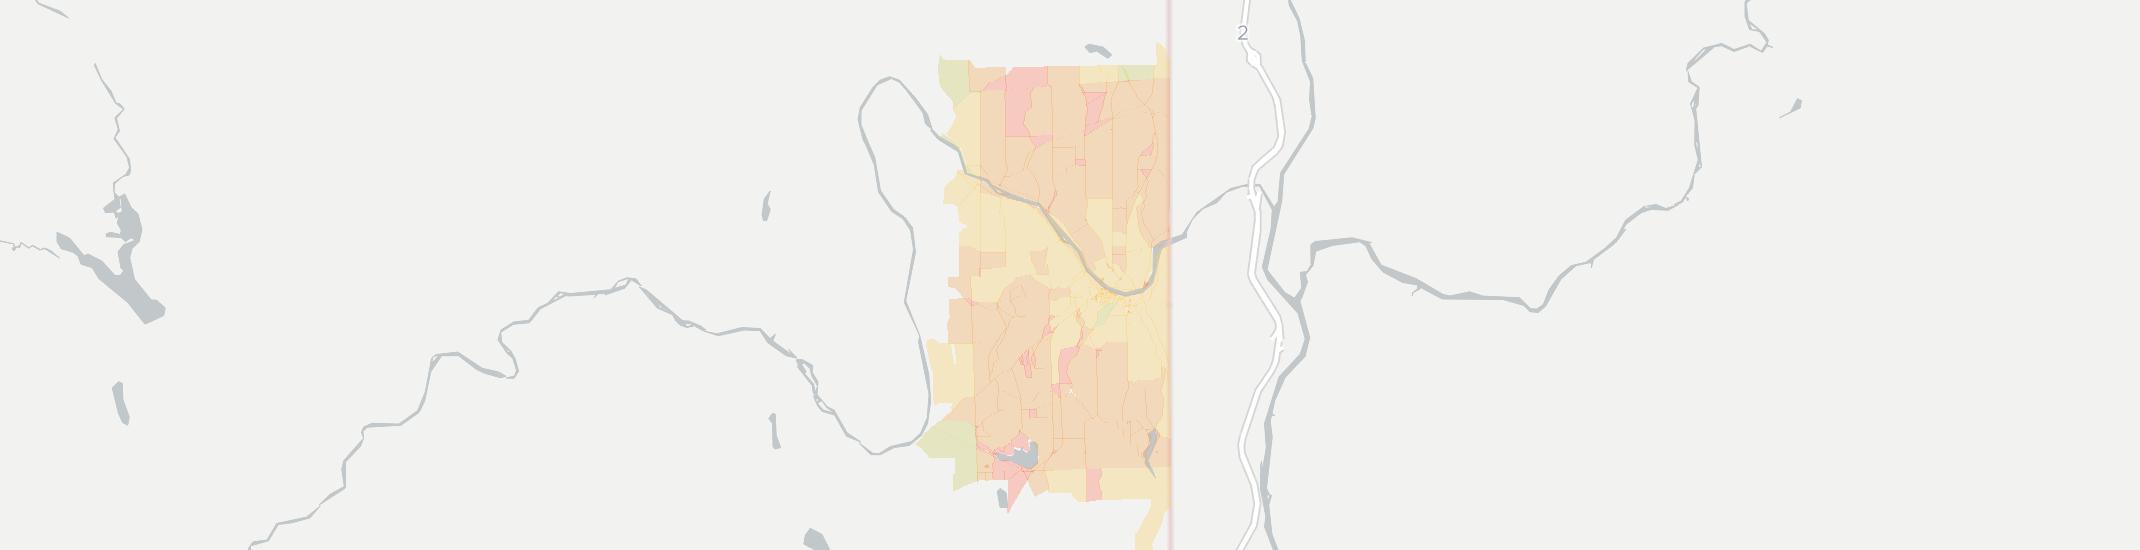 Fort Fairfield Internet Competition Map. Click for interactive map